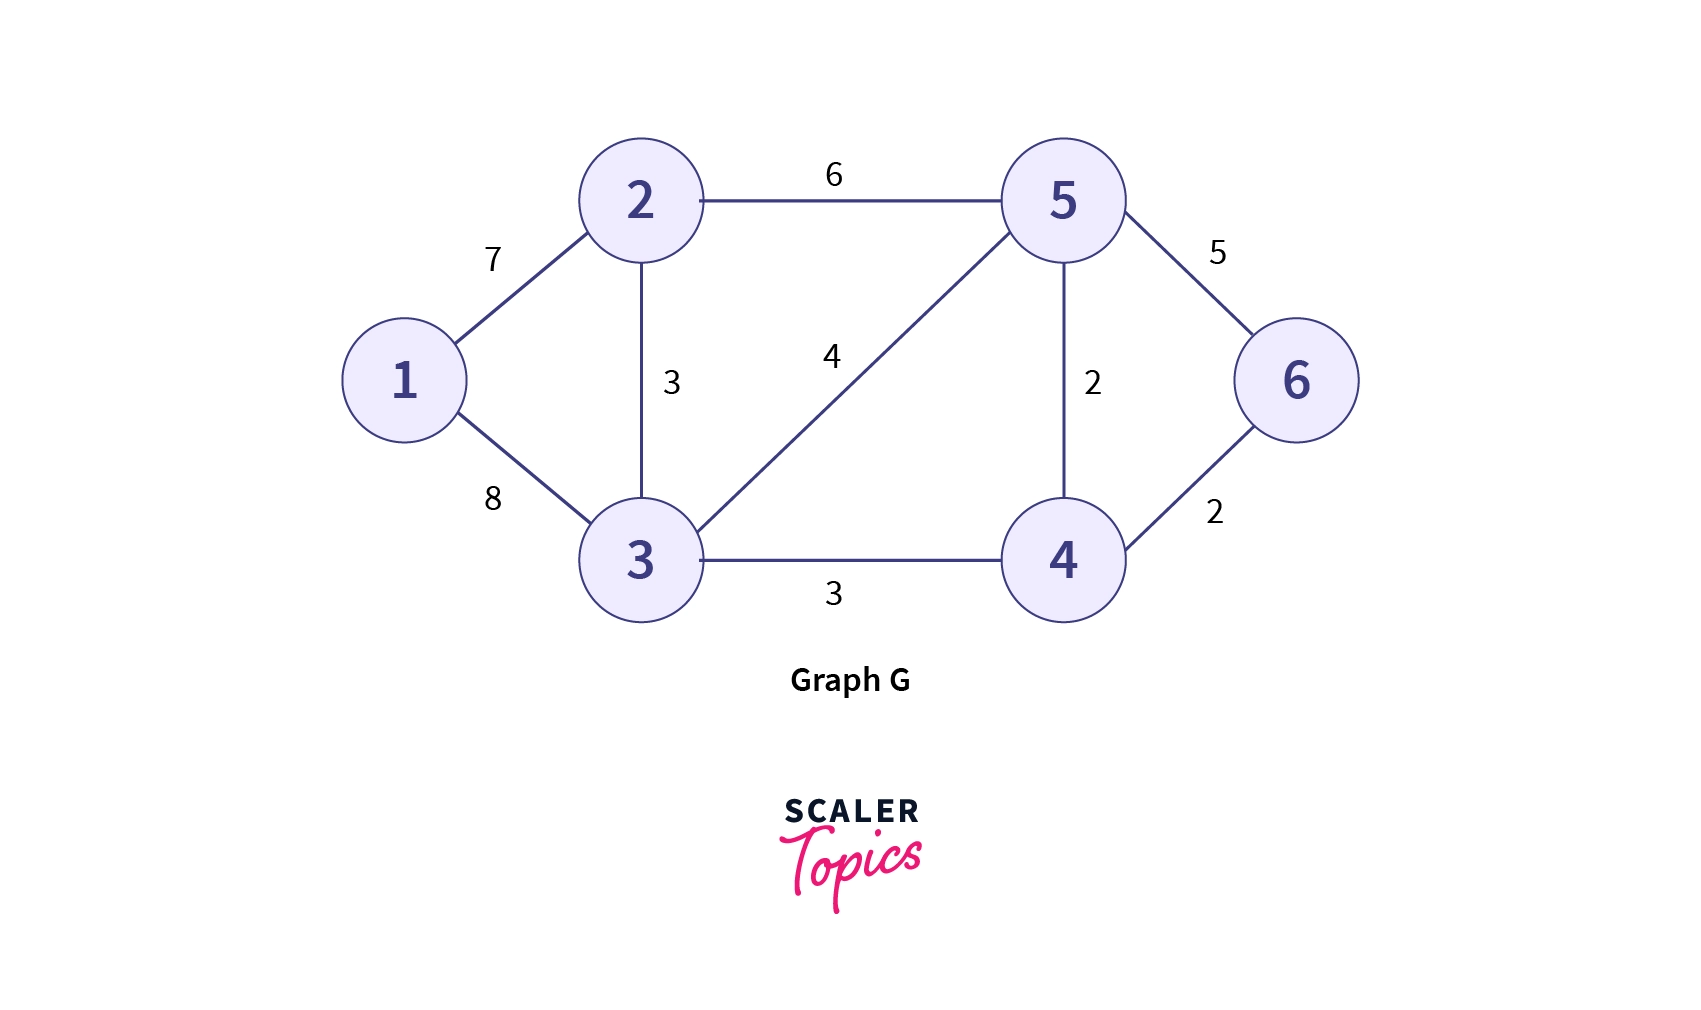 graph with 6 vertices and 9 edges